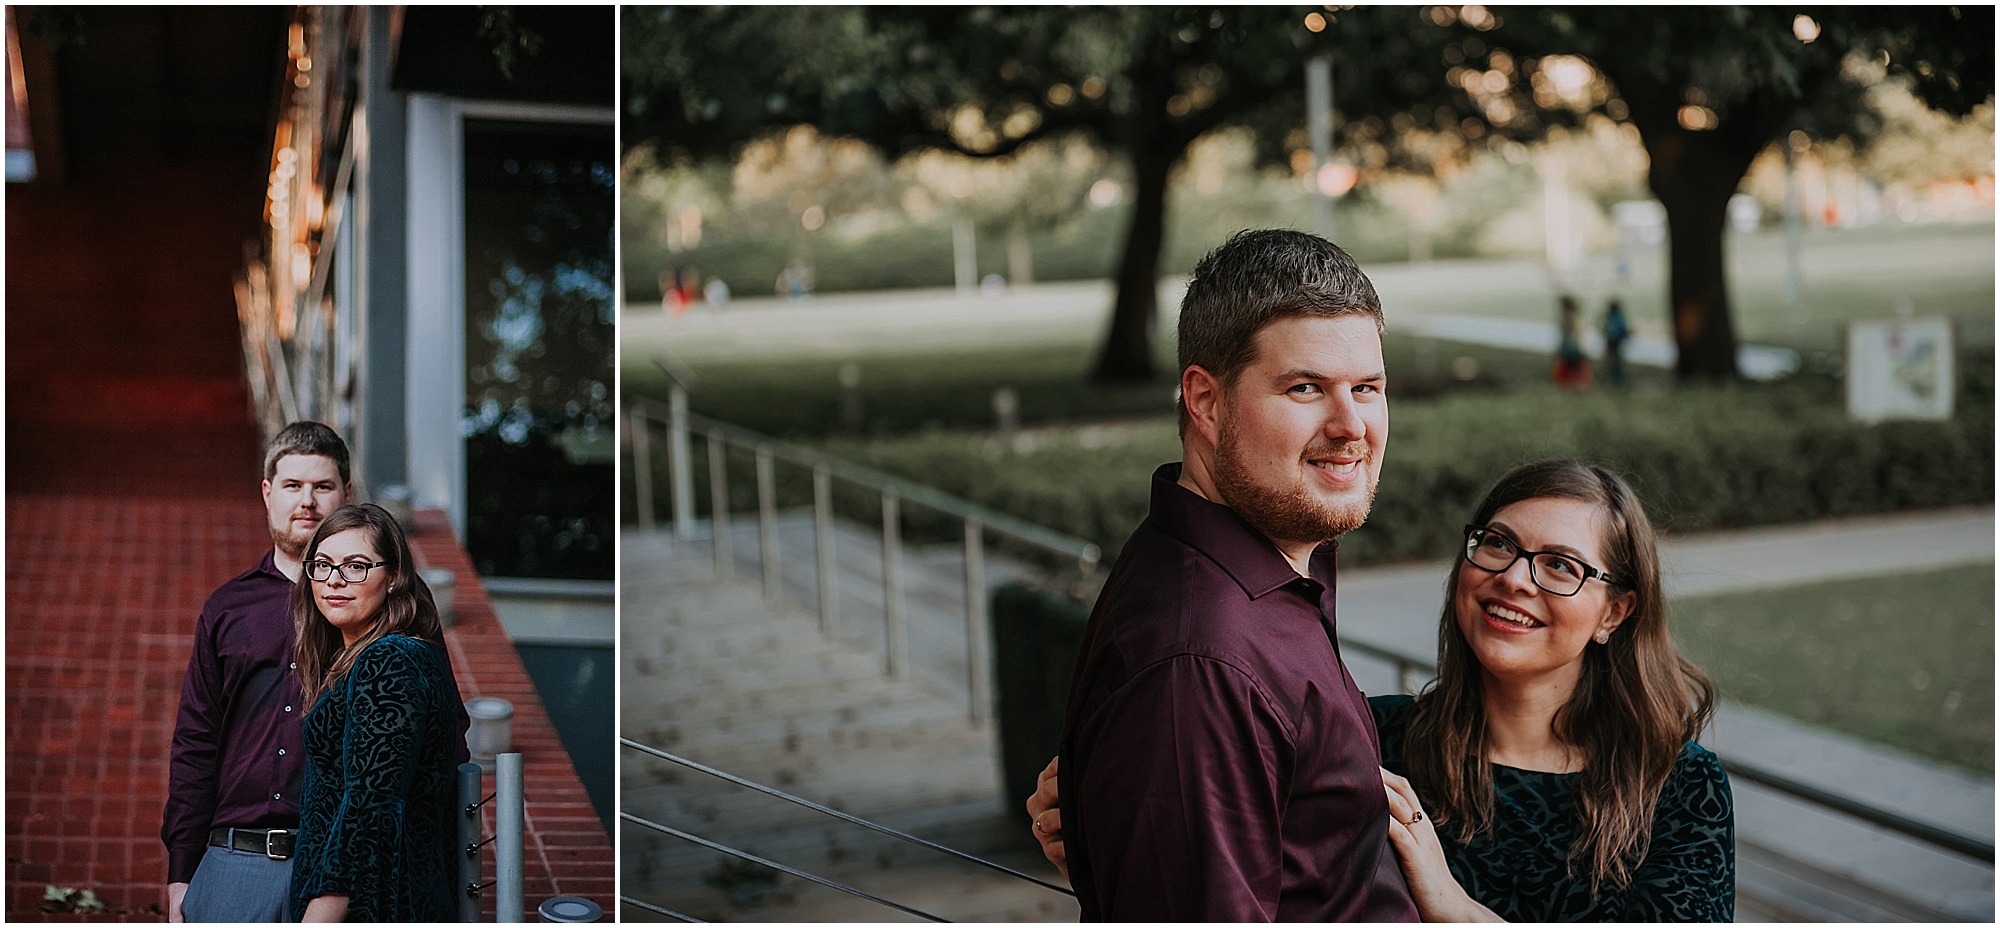 2017,engagements,heather purvis photography,julia and heath,